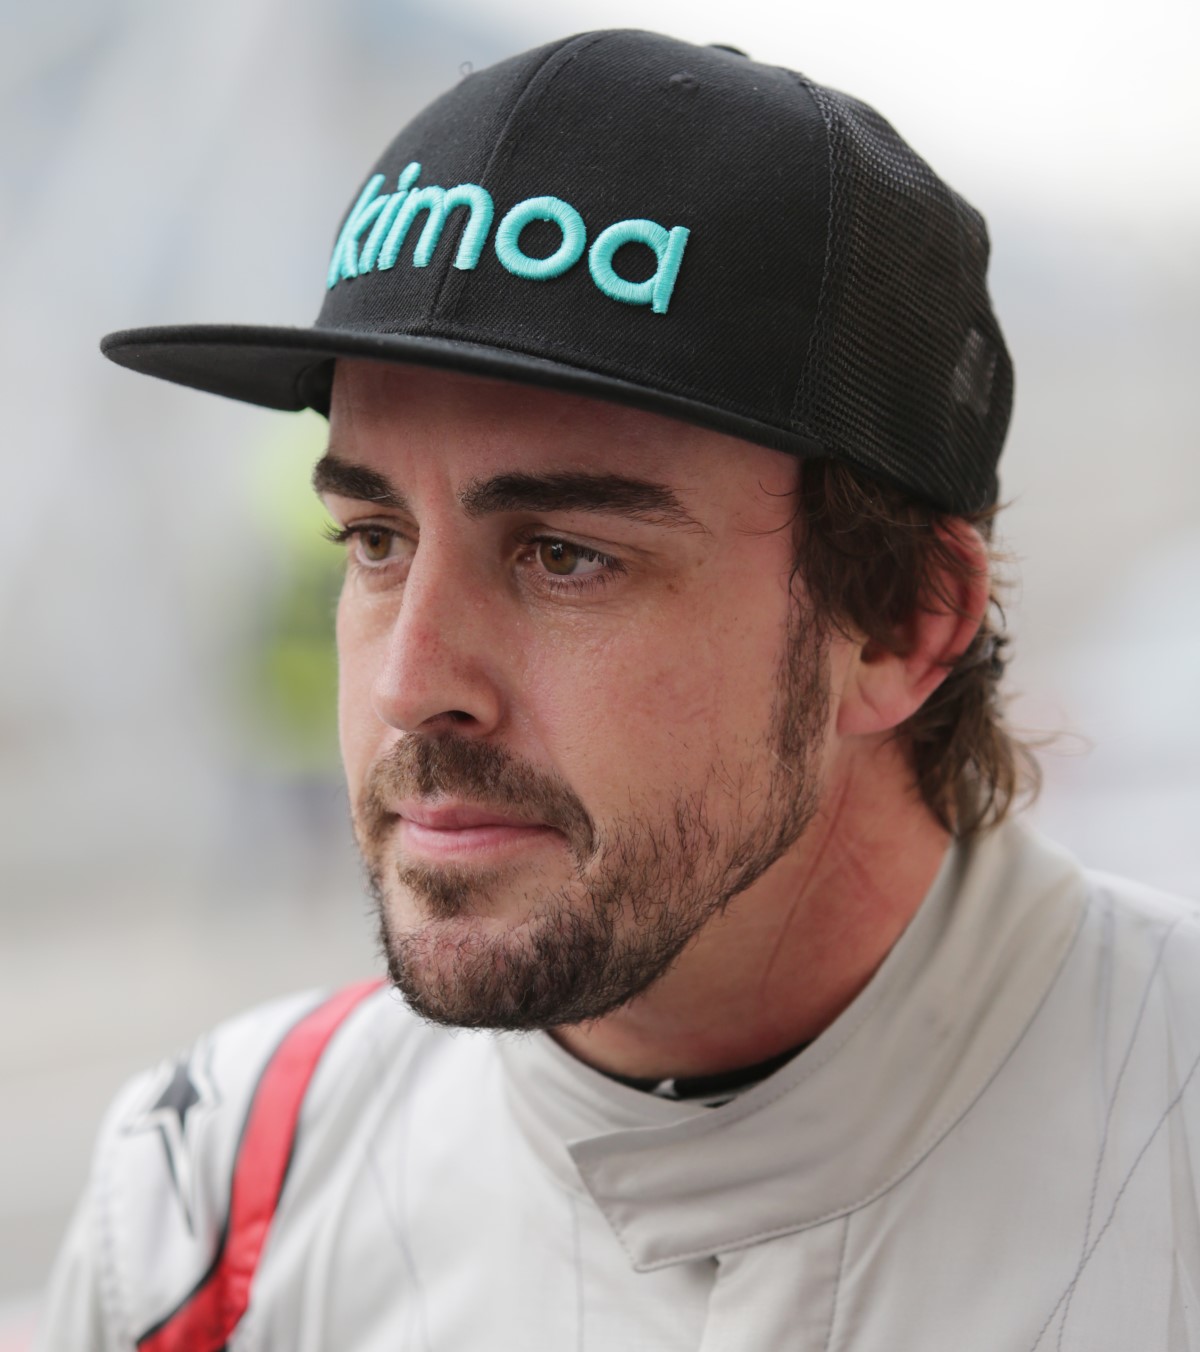 Alonso going big in China